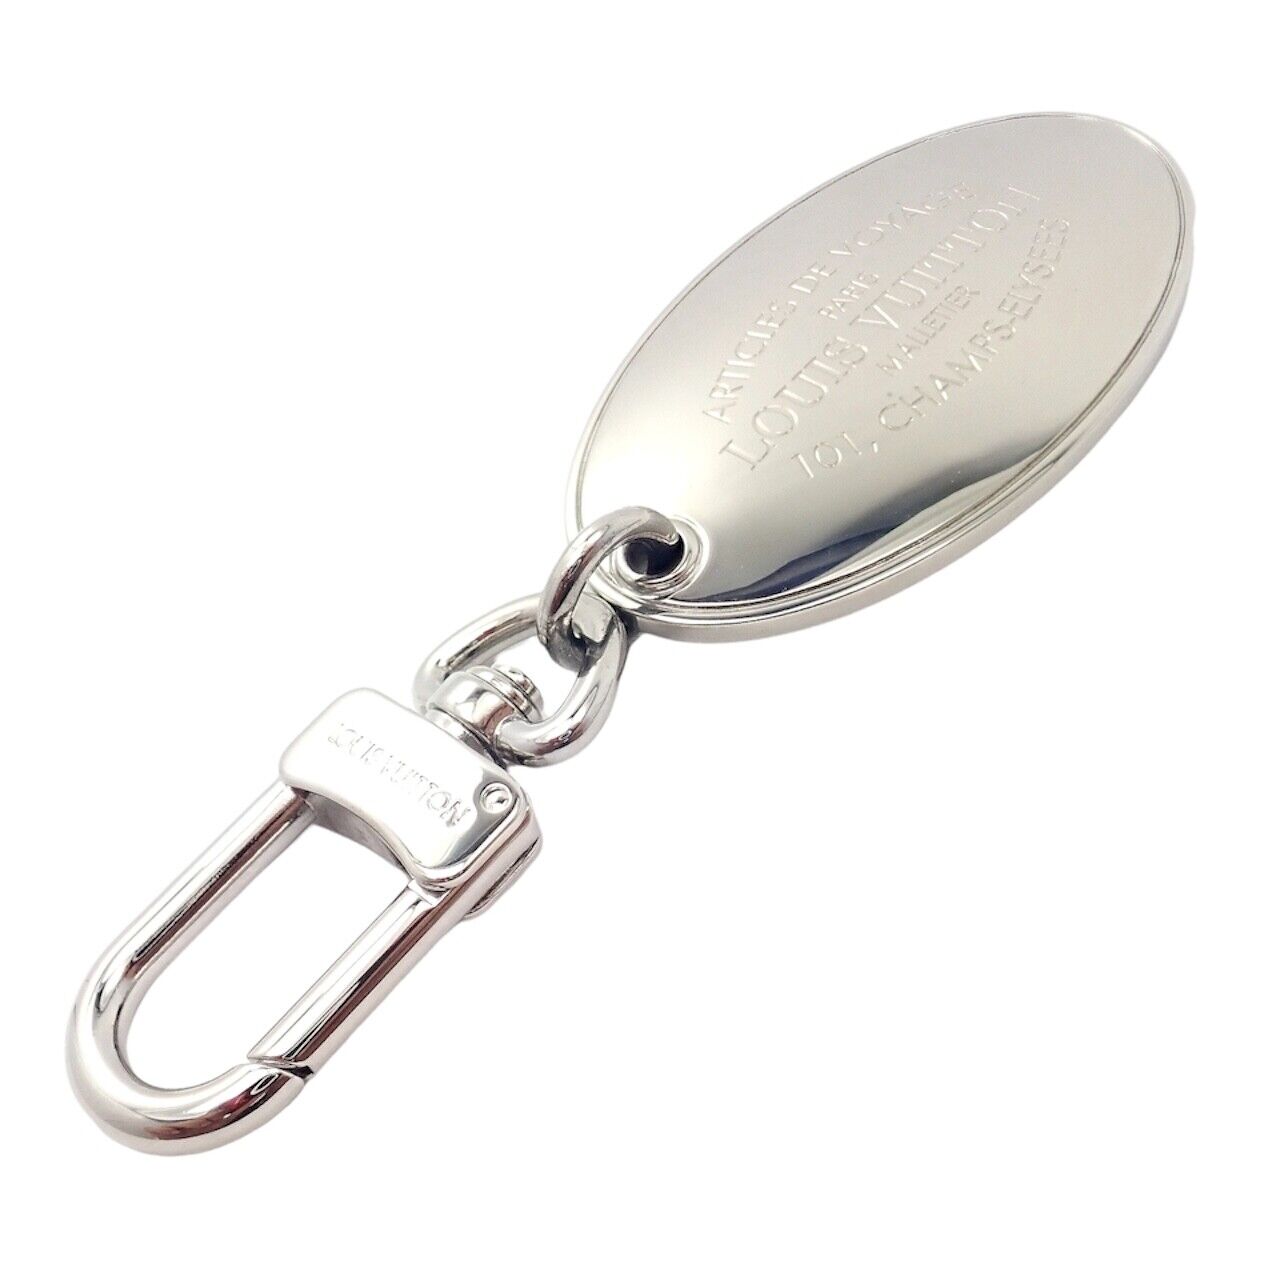 Louis Vuitton LV Large Stainless Steel Luggage Tag Key Chain